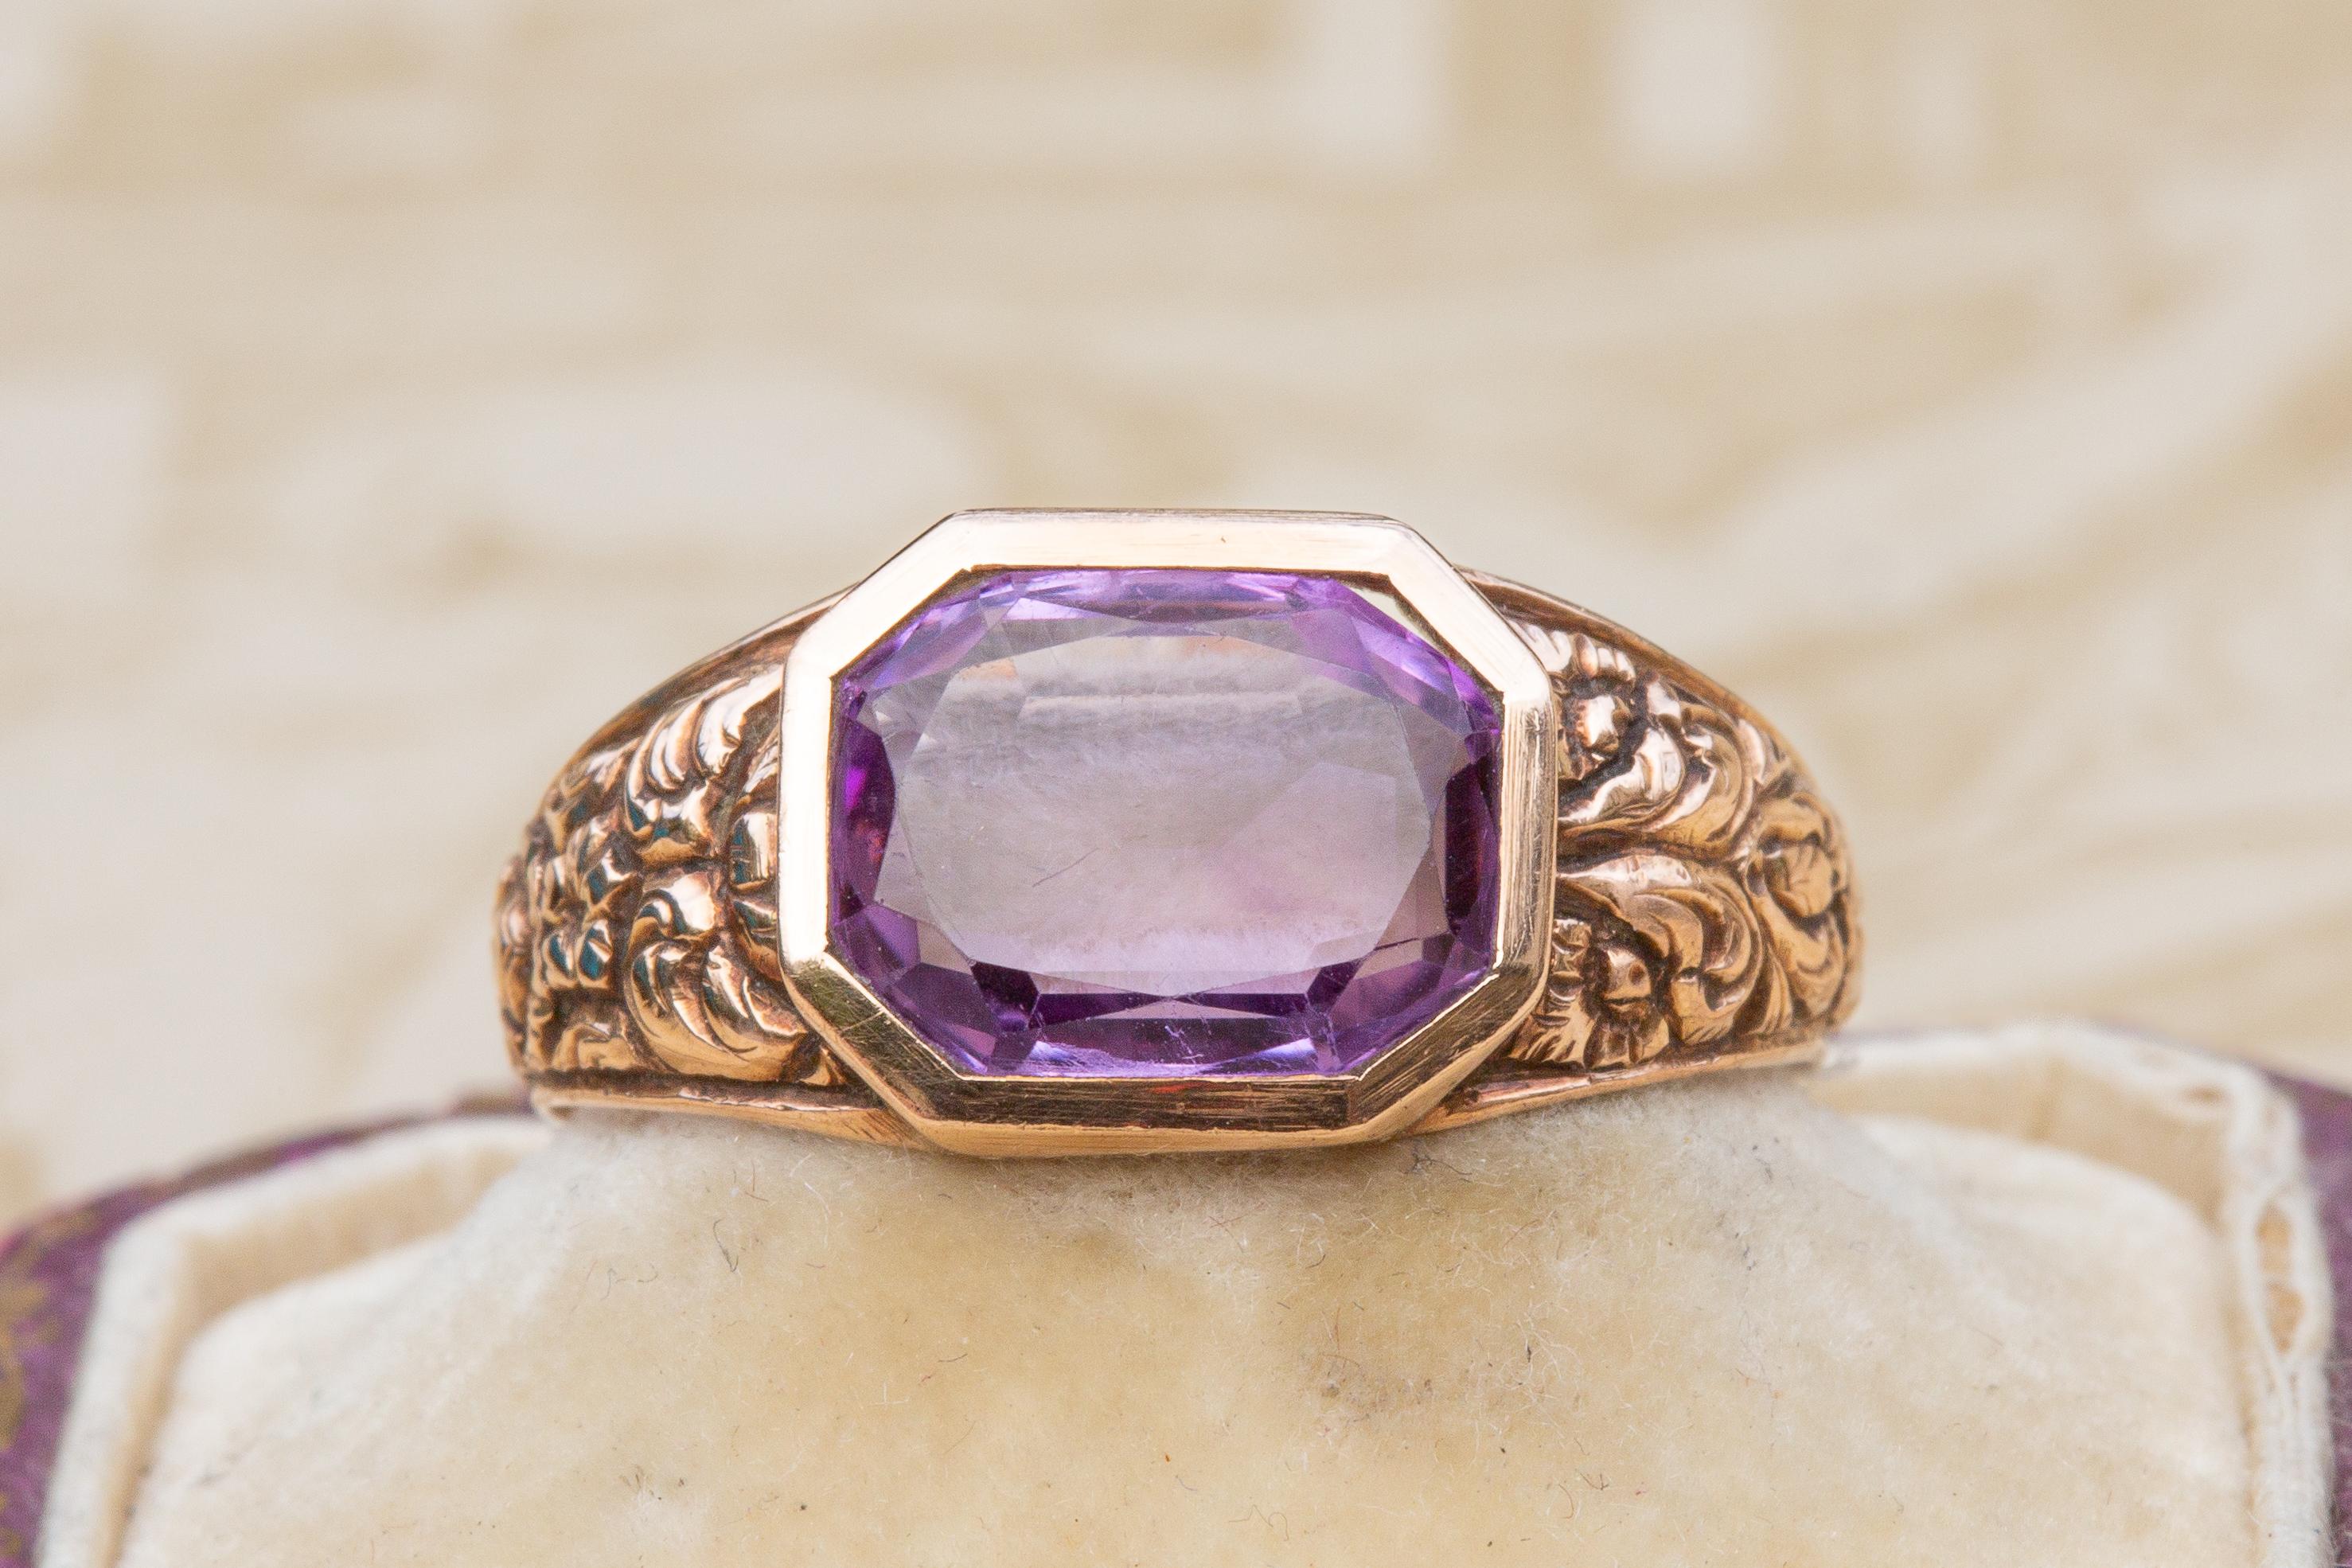 Stunning Antique Victorian 19th Century 14k Gold and Amethyst Ring 2